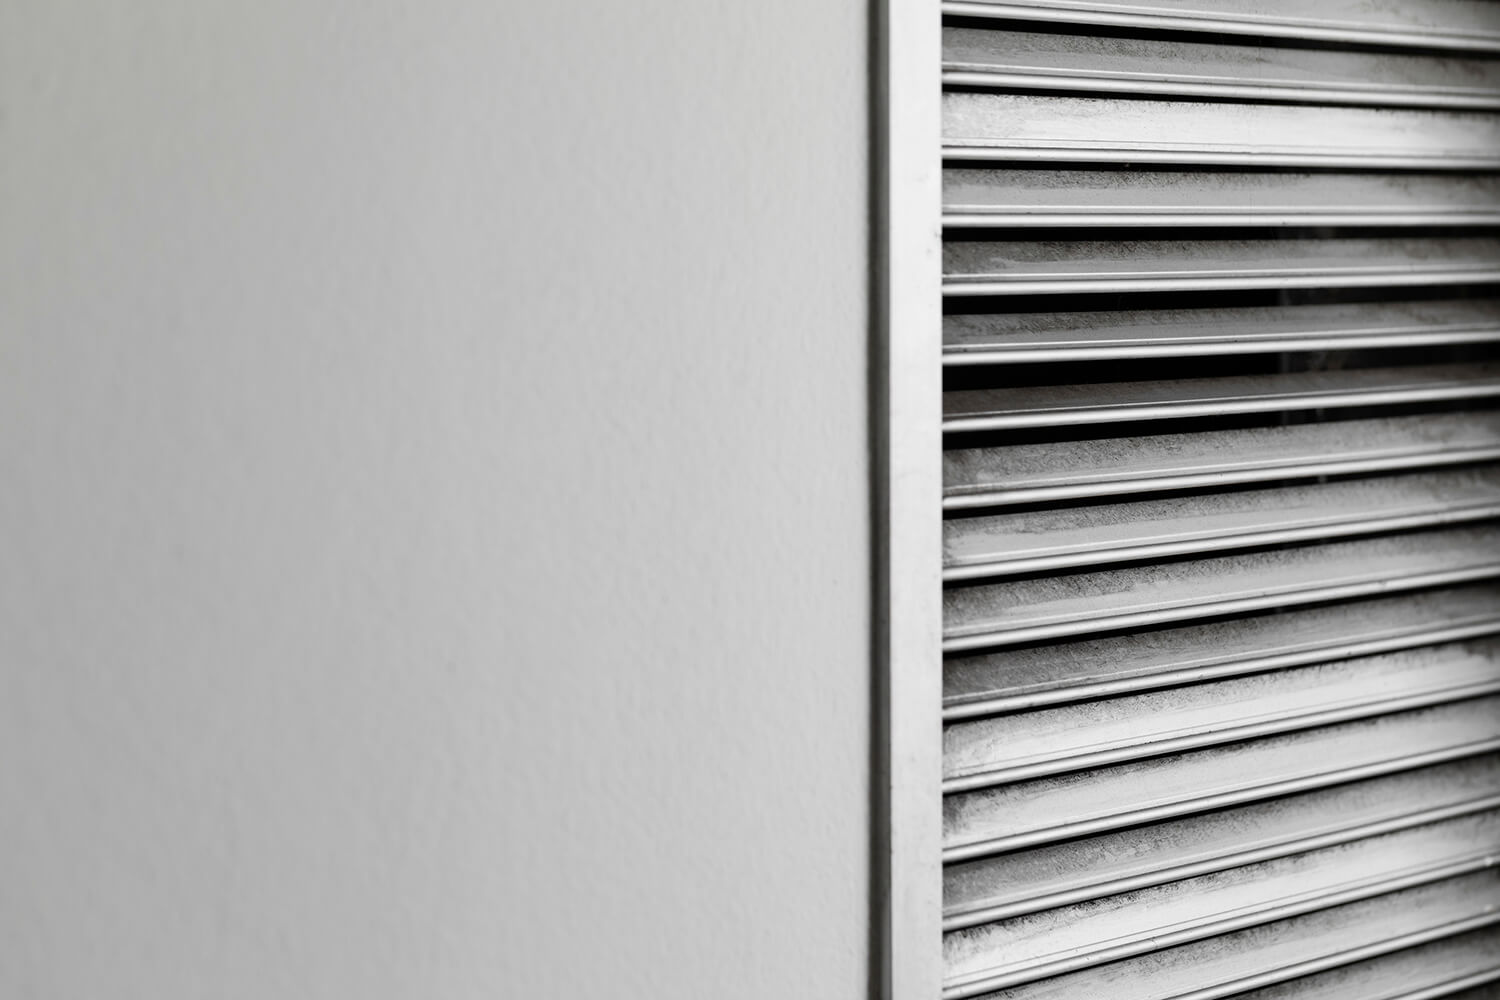 More about those smaller air conditioner units